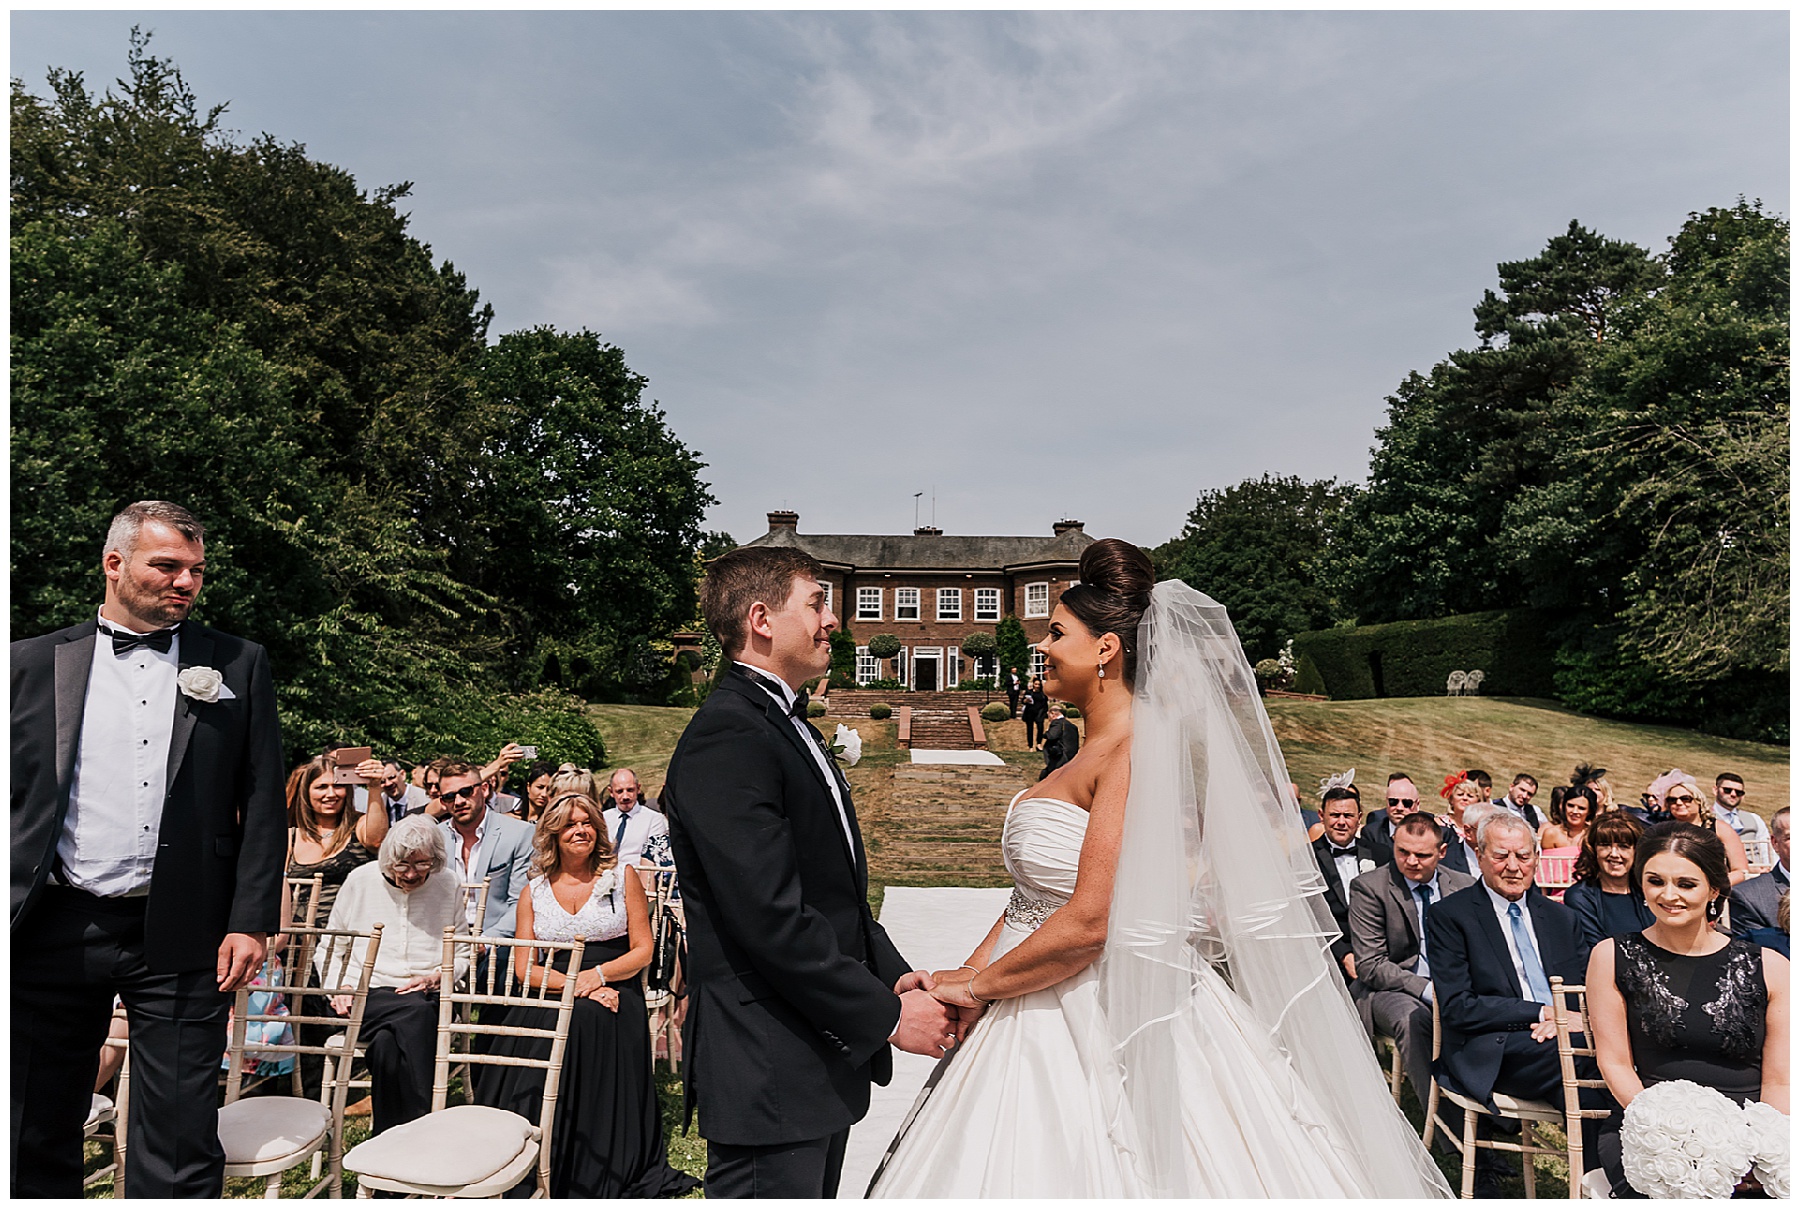 A Dreamy Summer Wedding at Delamere Manor